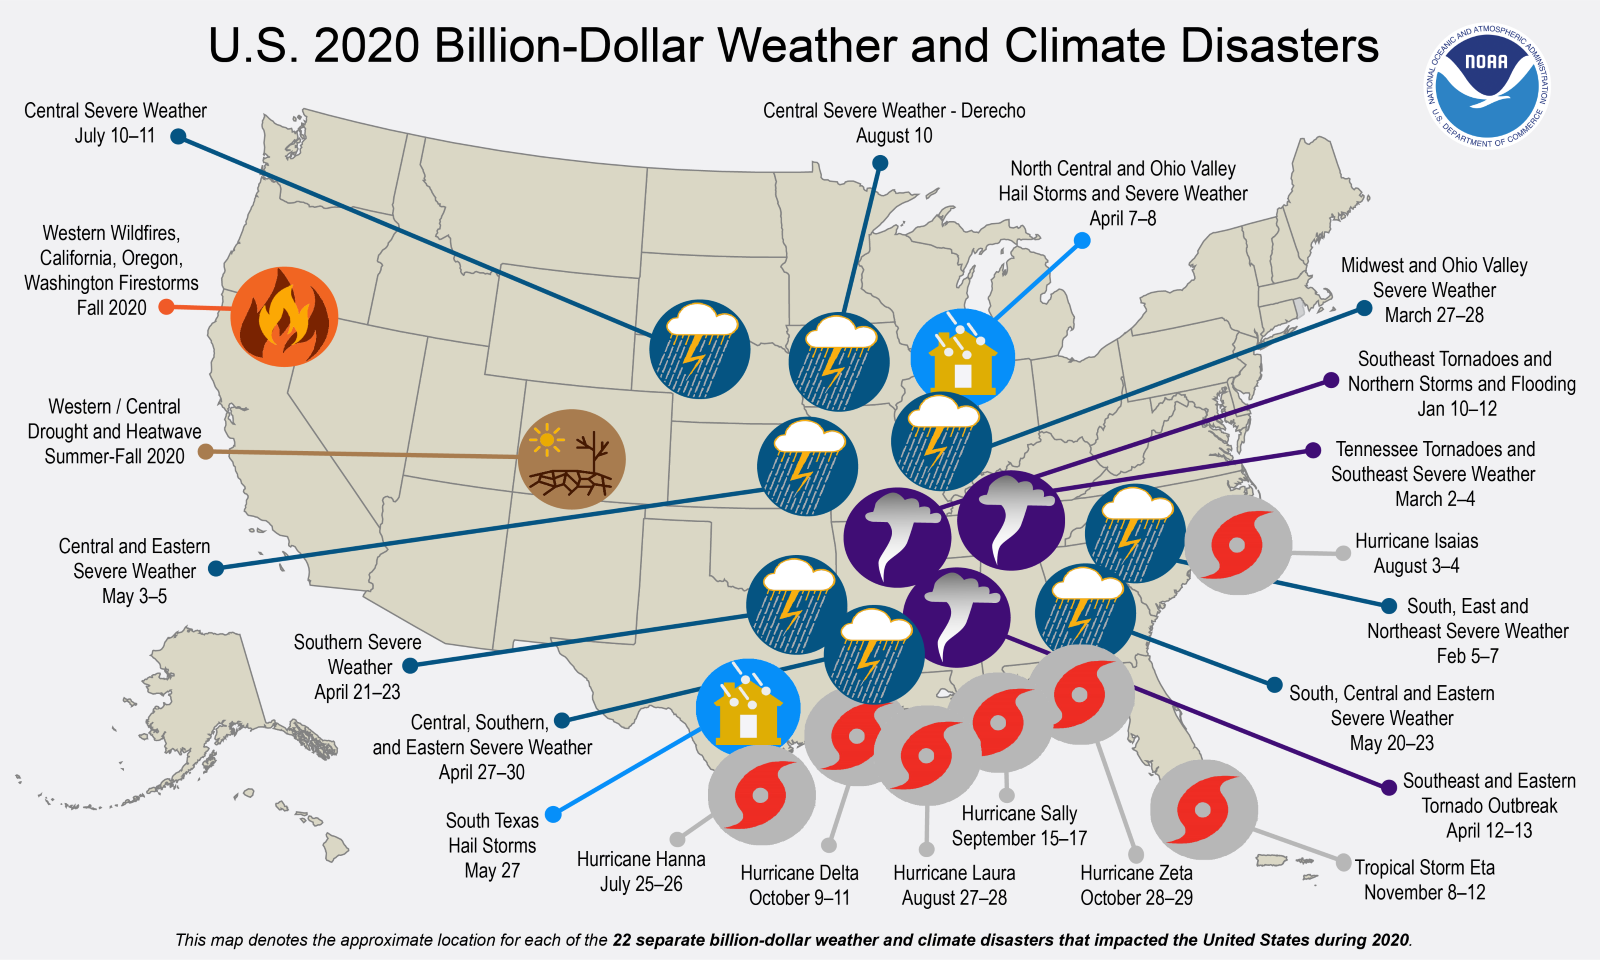 US 2020 Billion-Dollar Weather and Climate Disasters